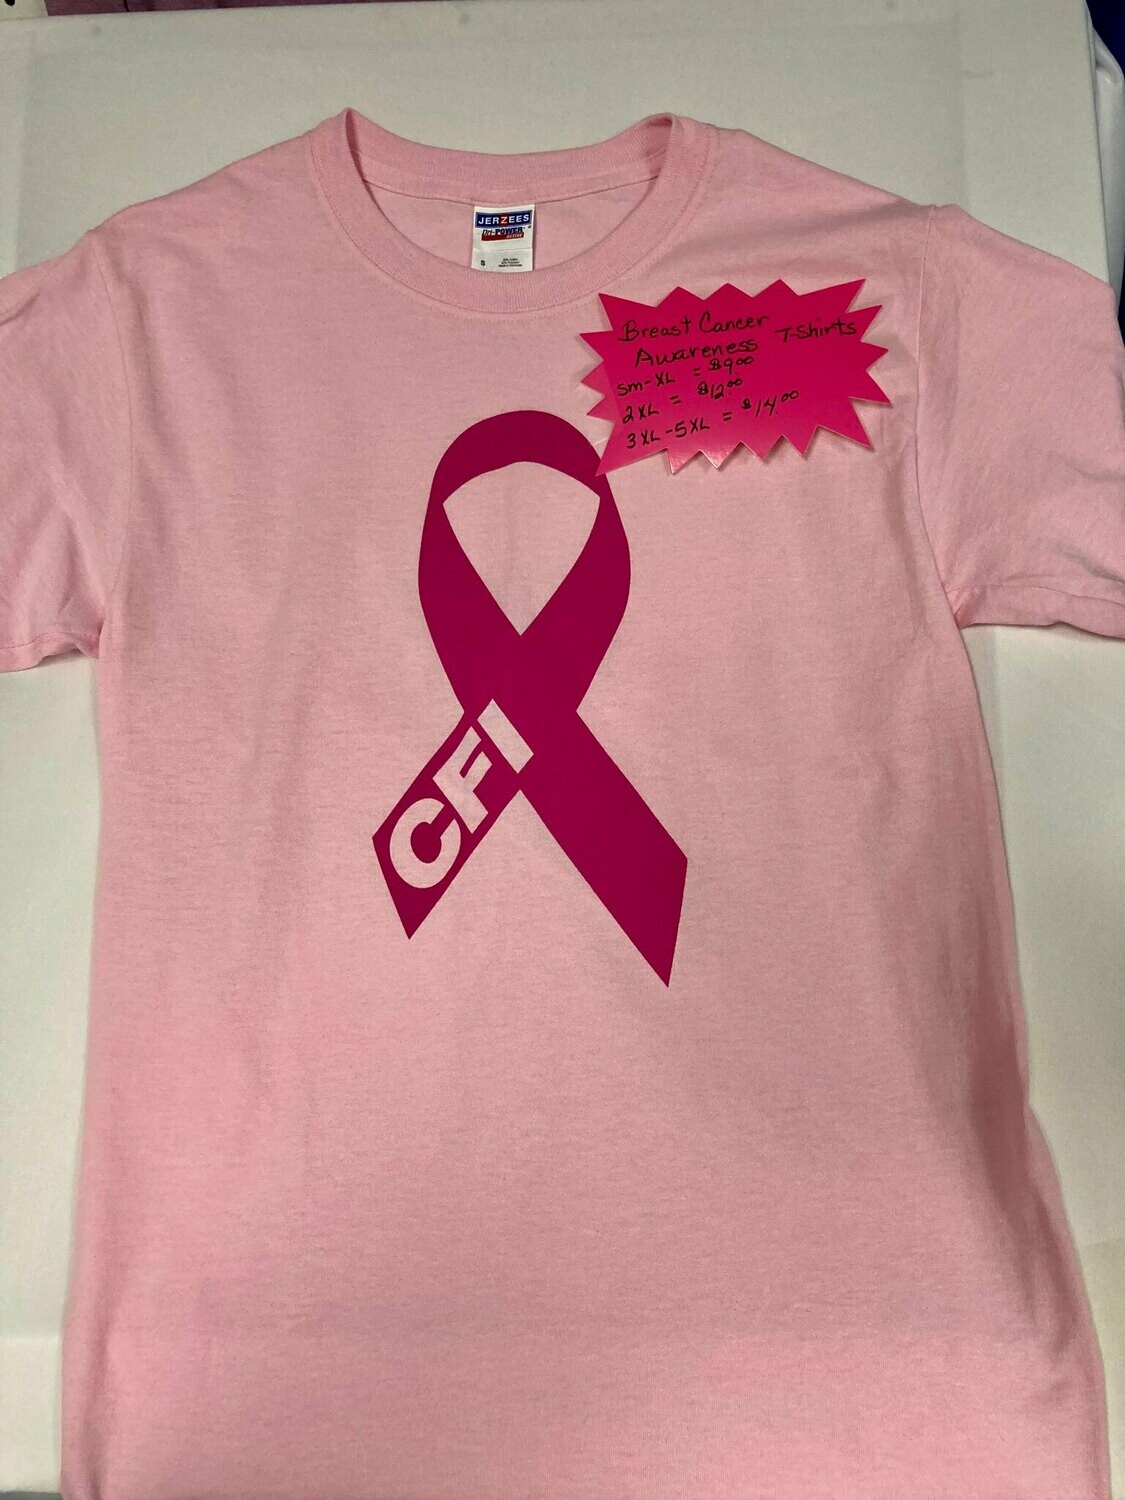 BREAST CANCER AWARENESS T-SHIRT CLASSIC PINK - SMALL